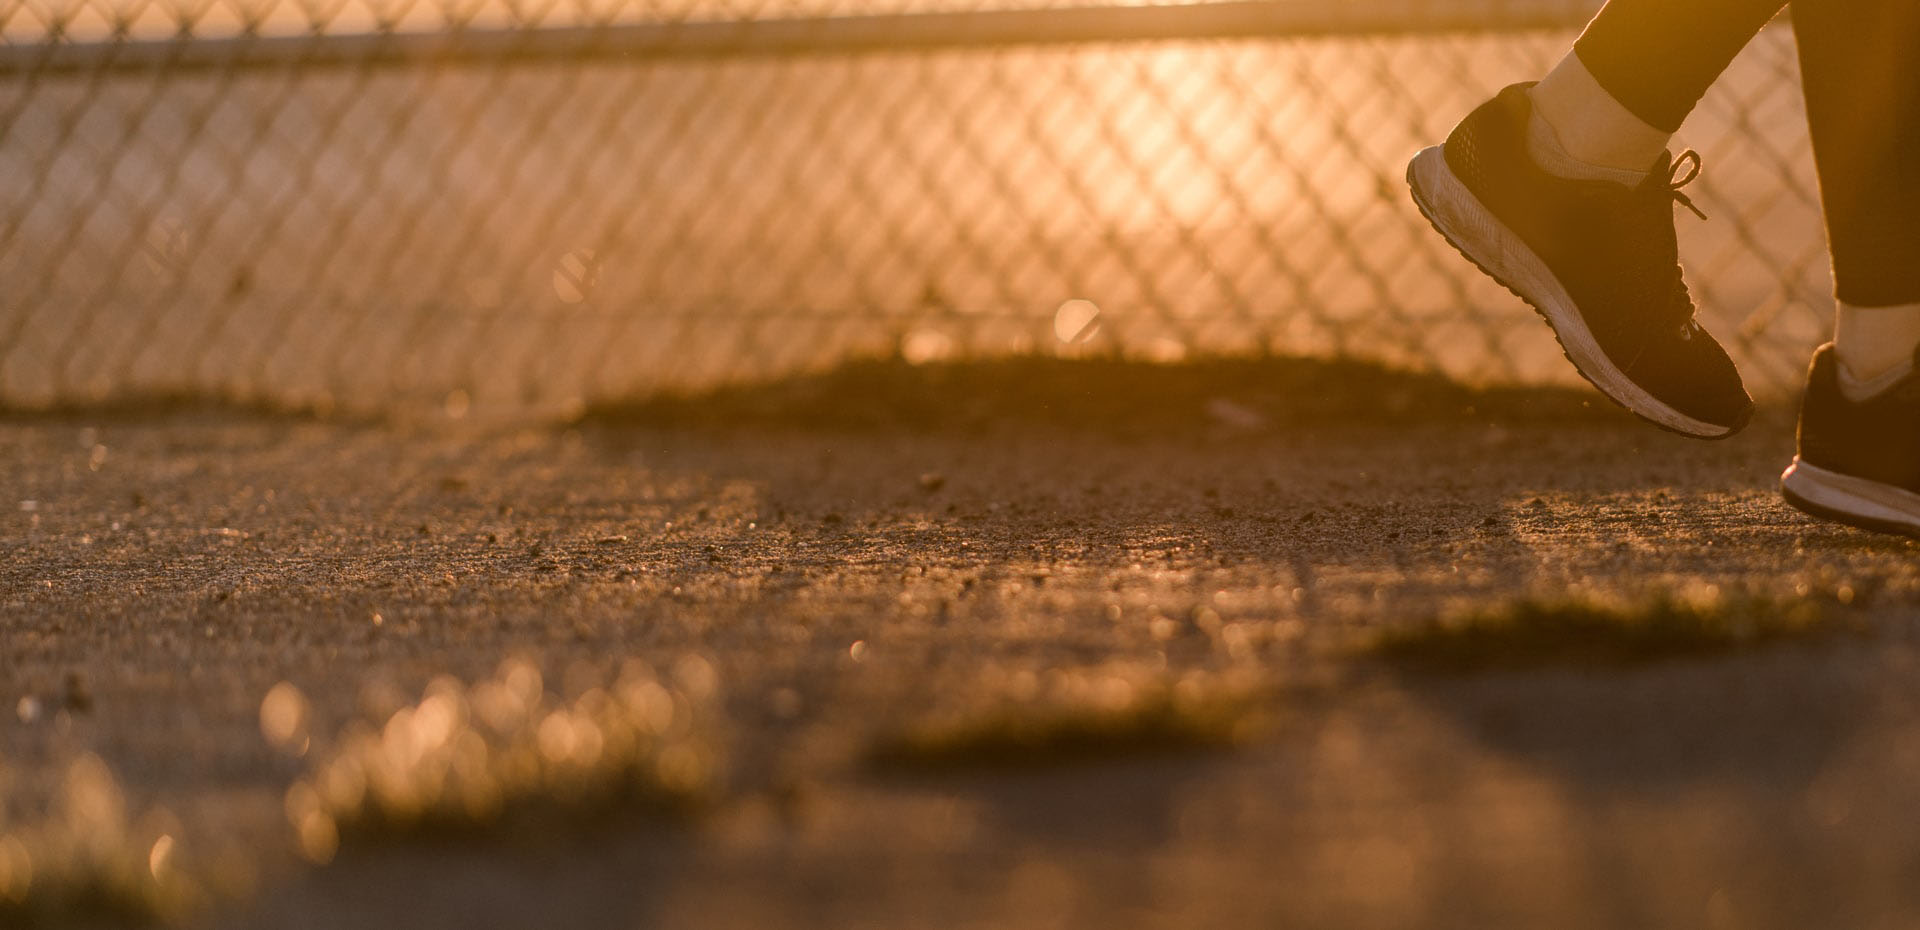 A sepia-toned image of someone wearing sneakers as they walk beside a chain link fence.